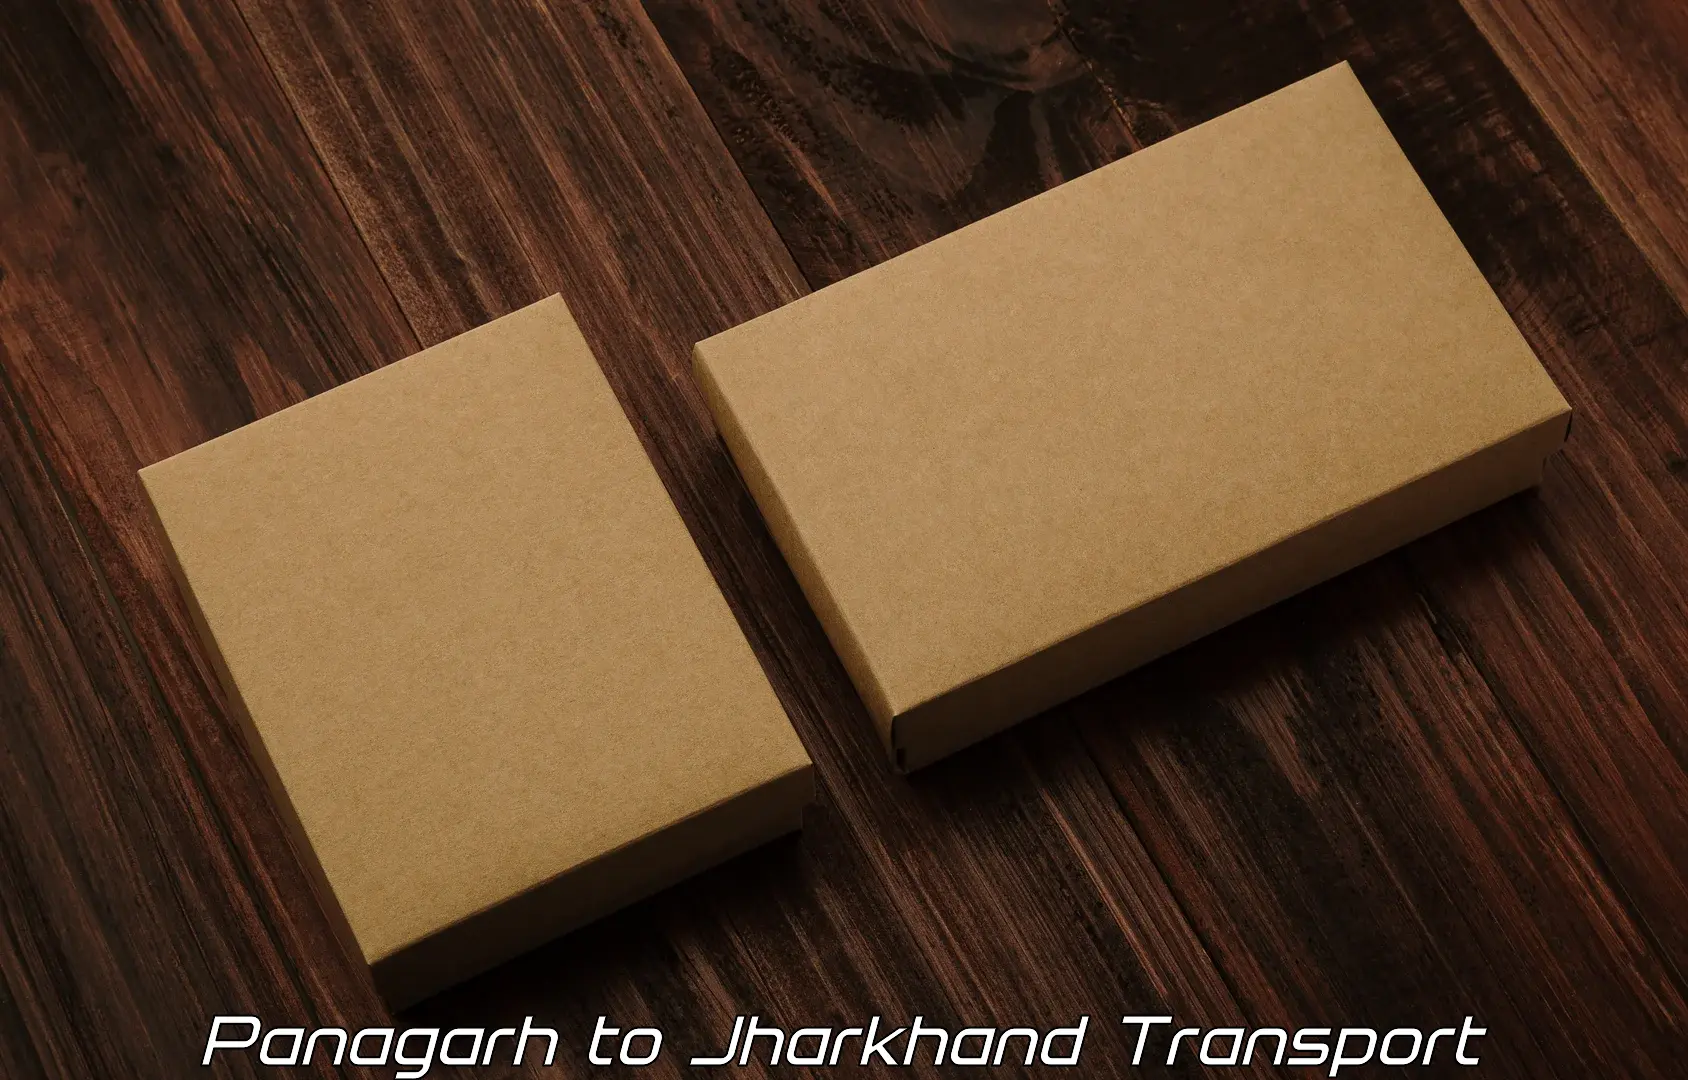 Delivery service Panagarh to Jharkhand